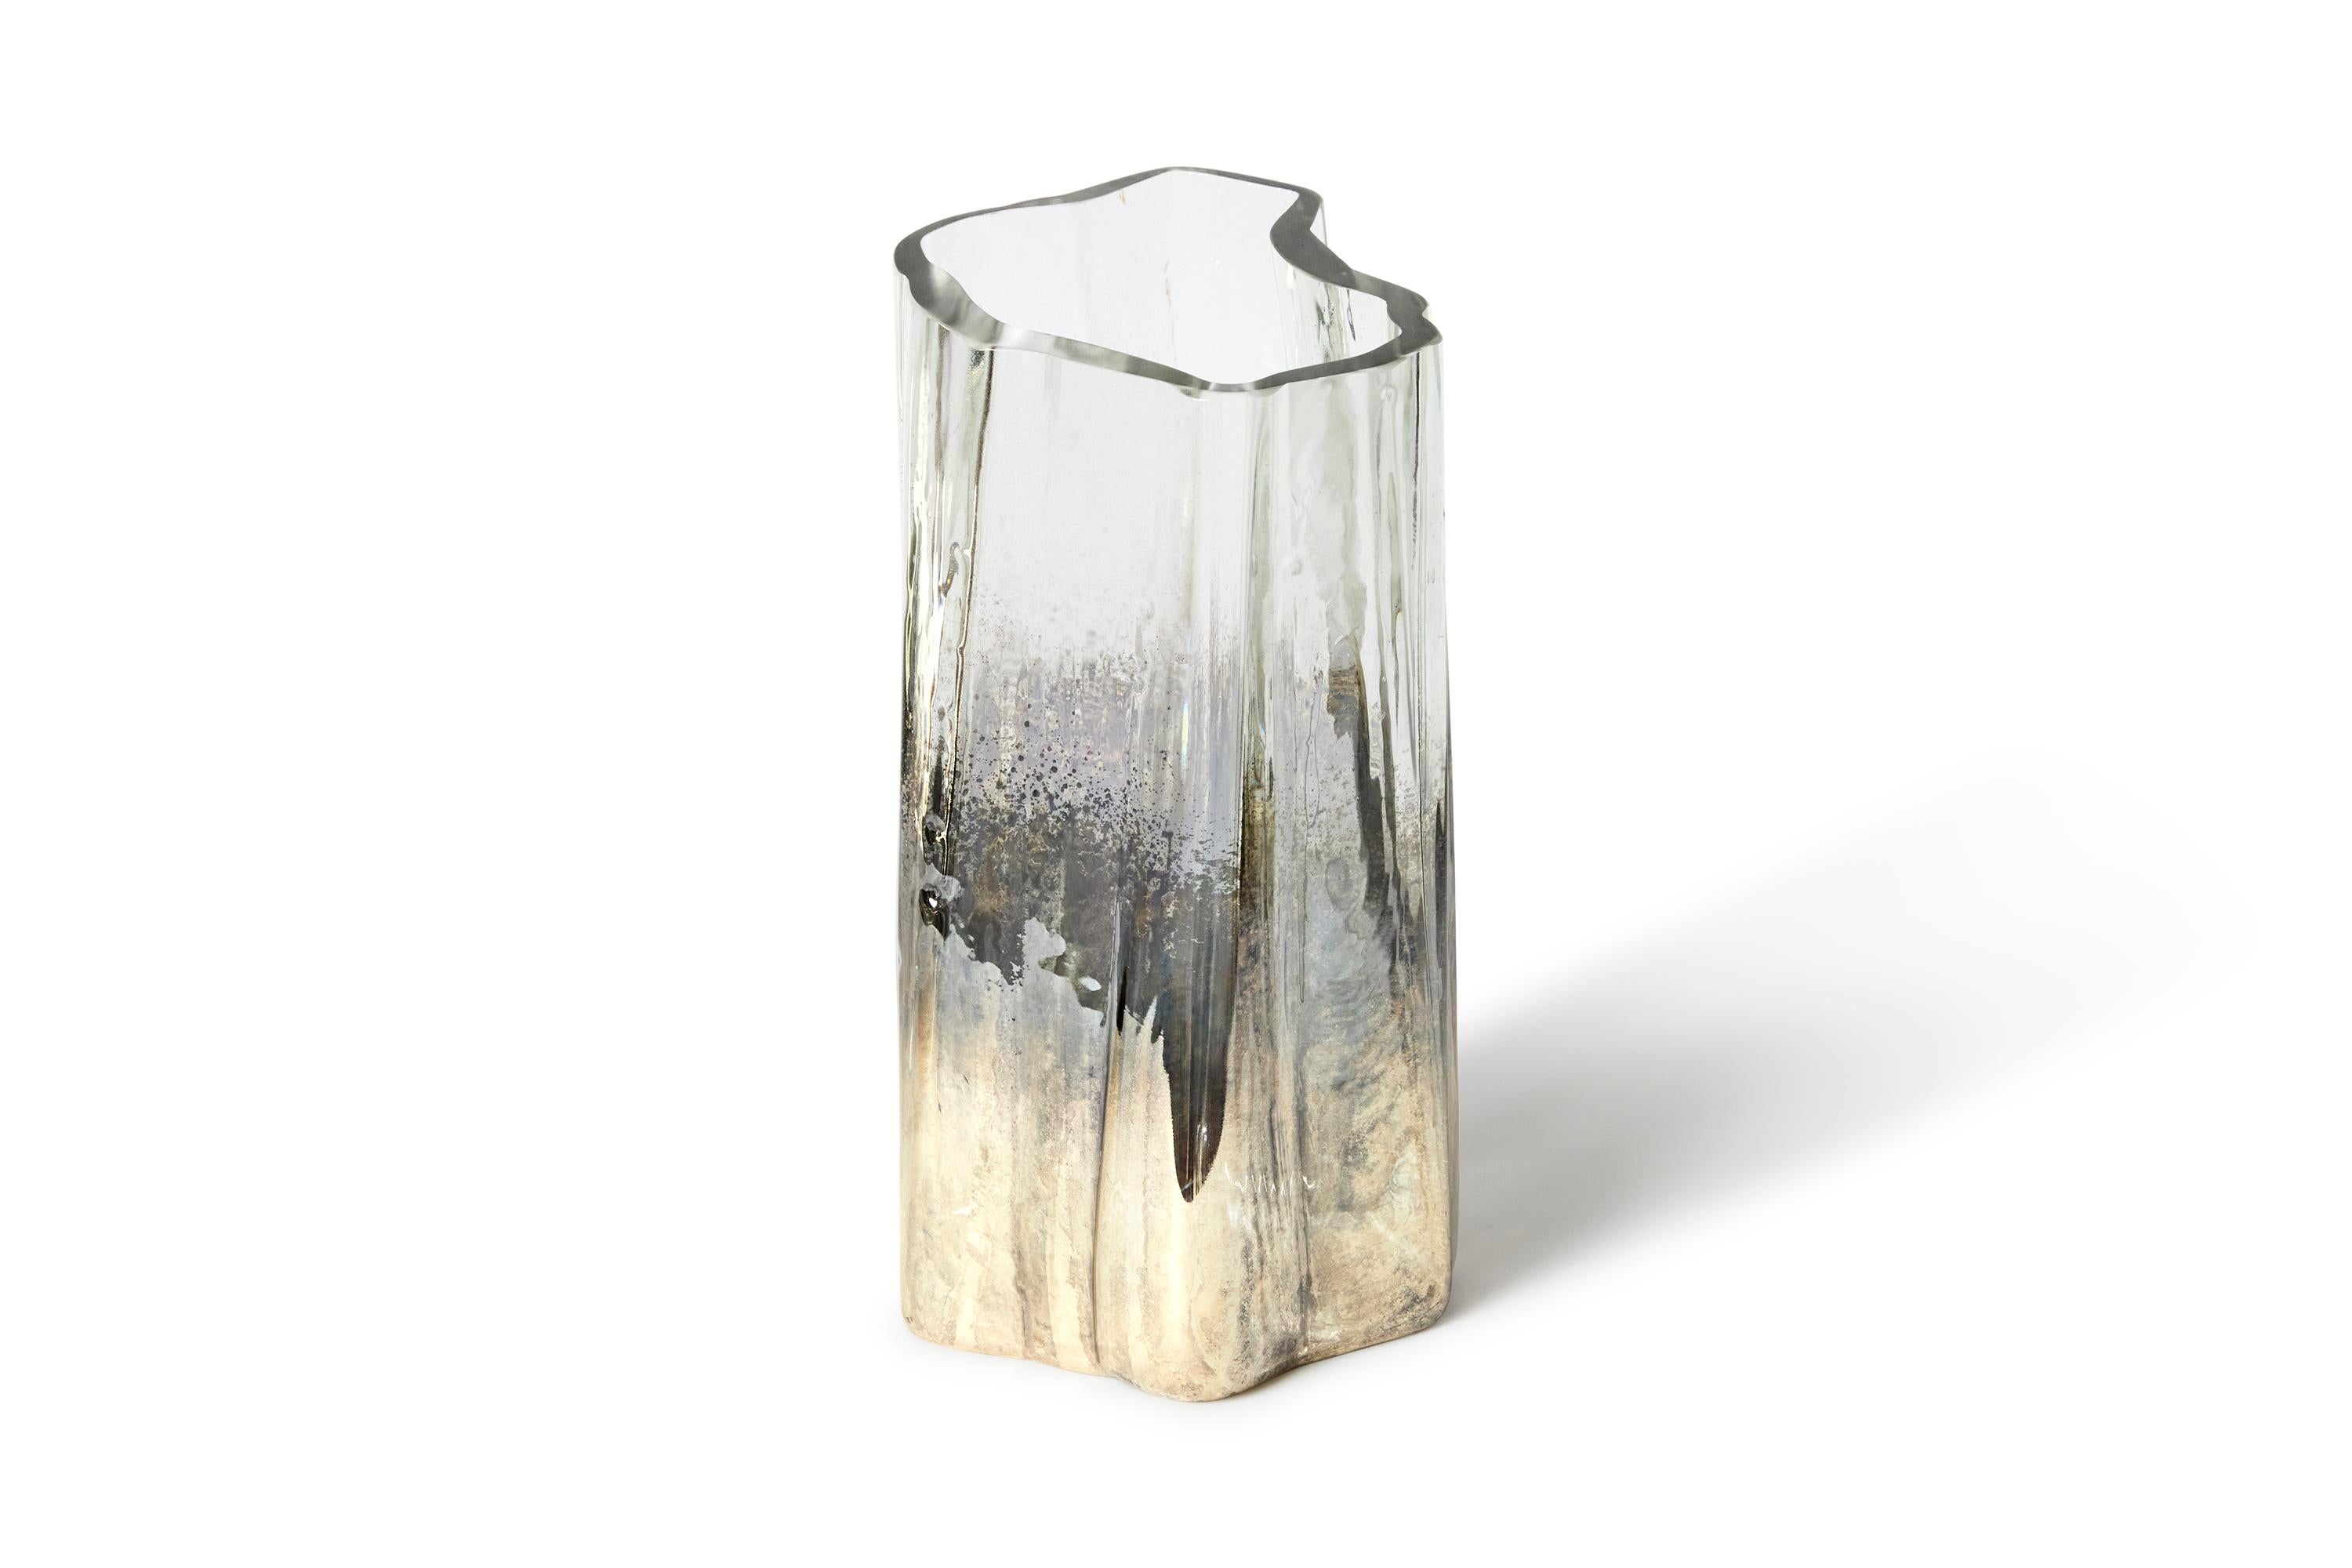 Gregory Nangle
Cleaving Ghost Vase, 2021
Mercury and glass
7 x 8 x 13.25 in.